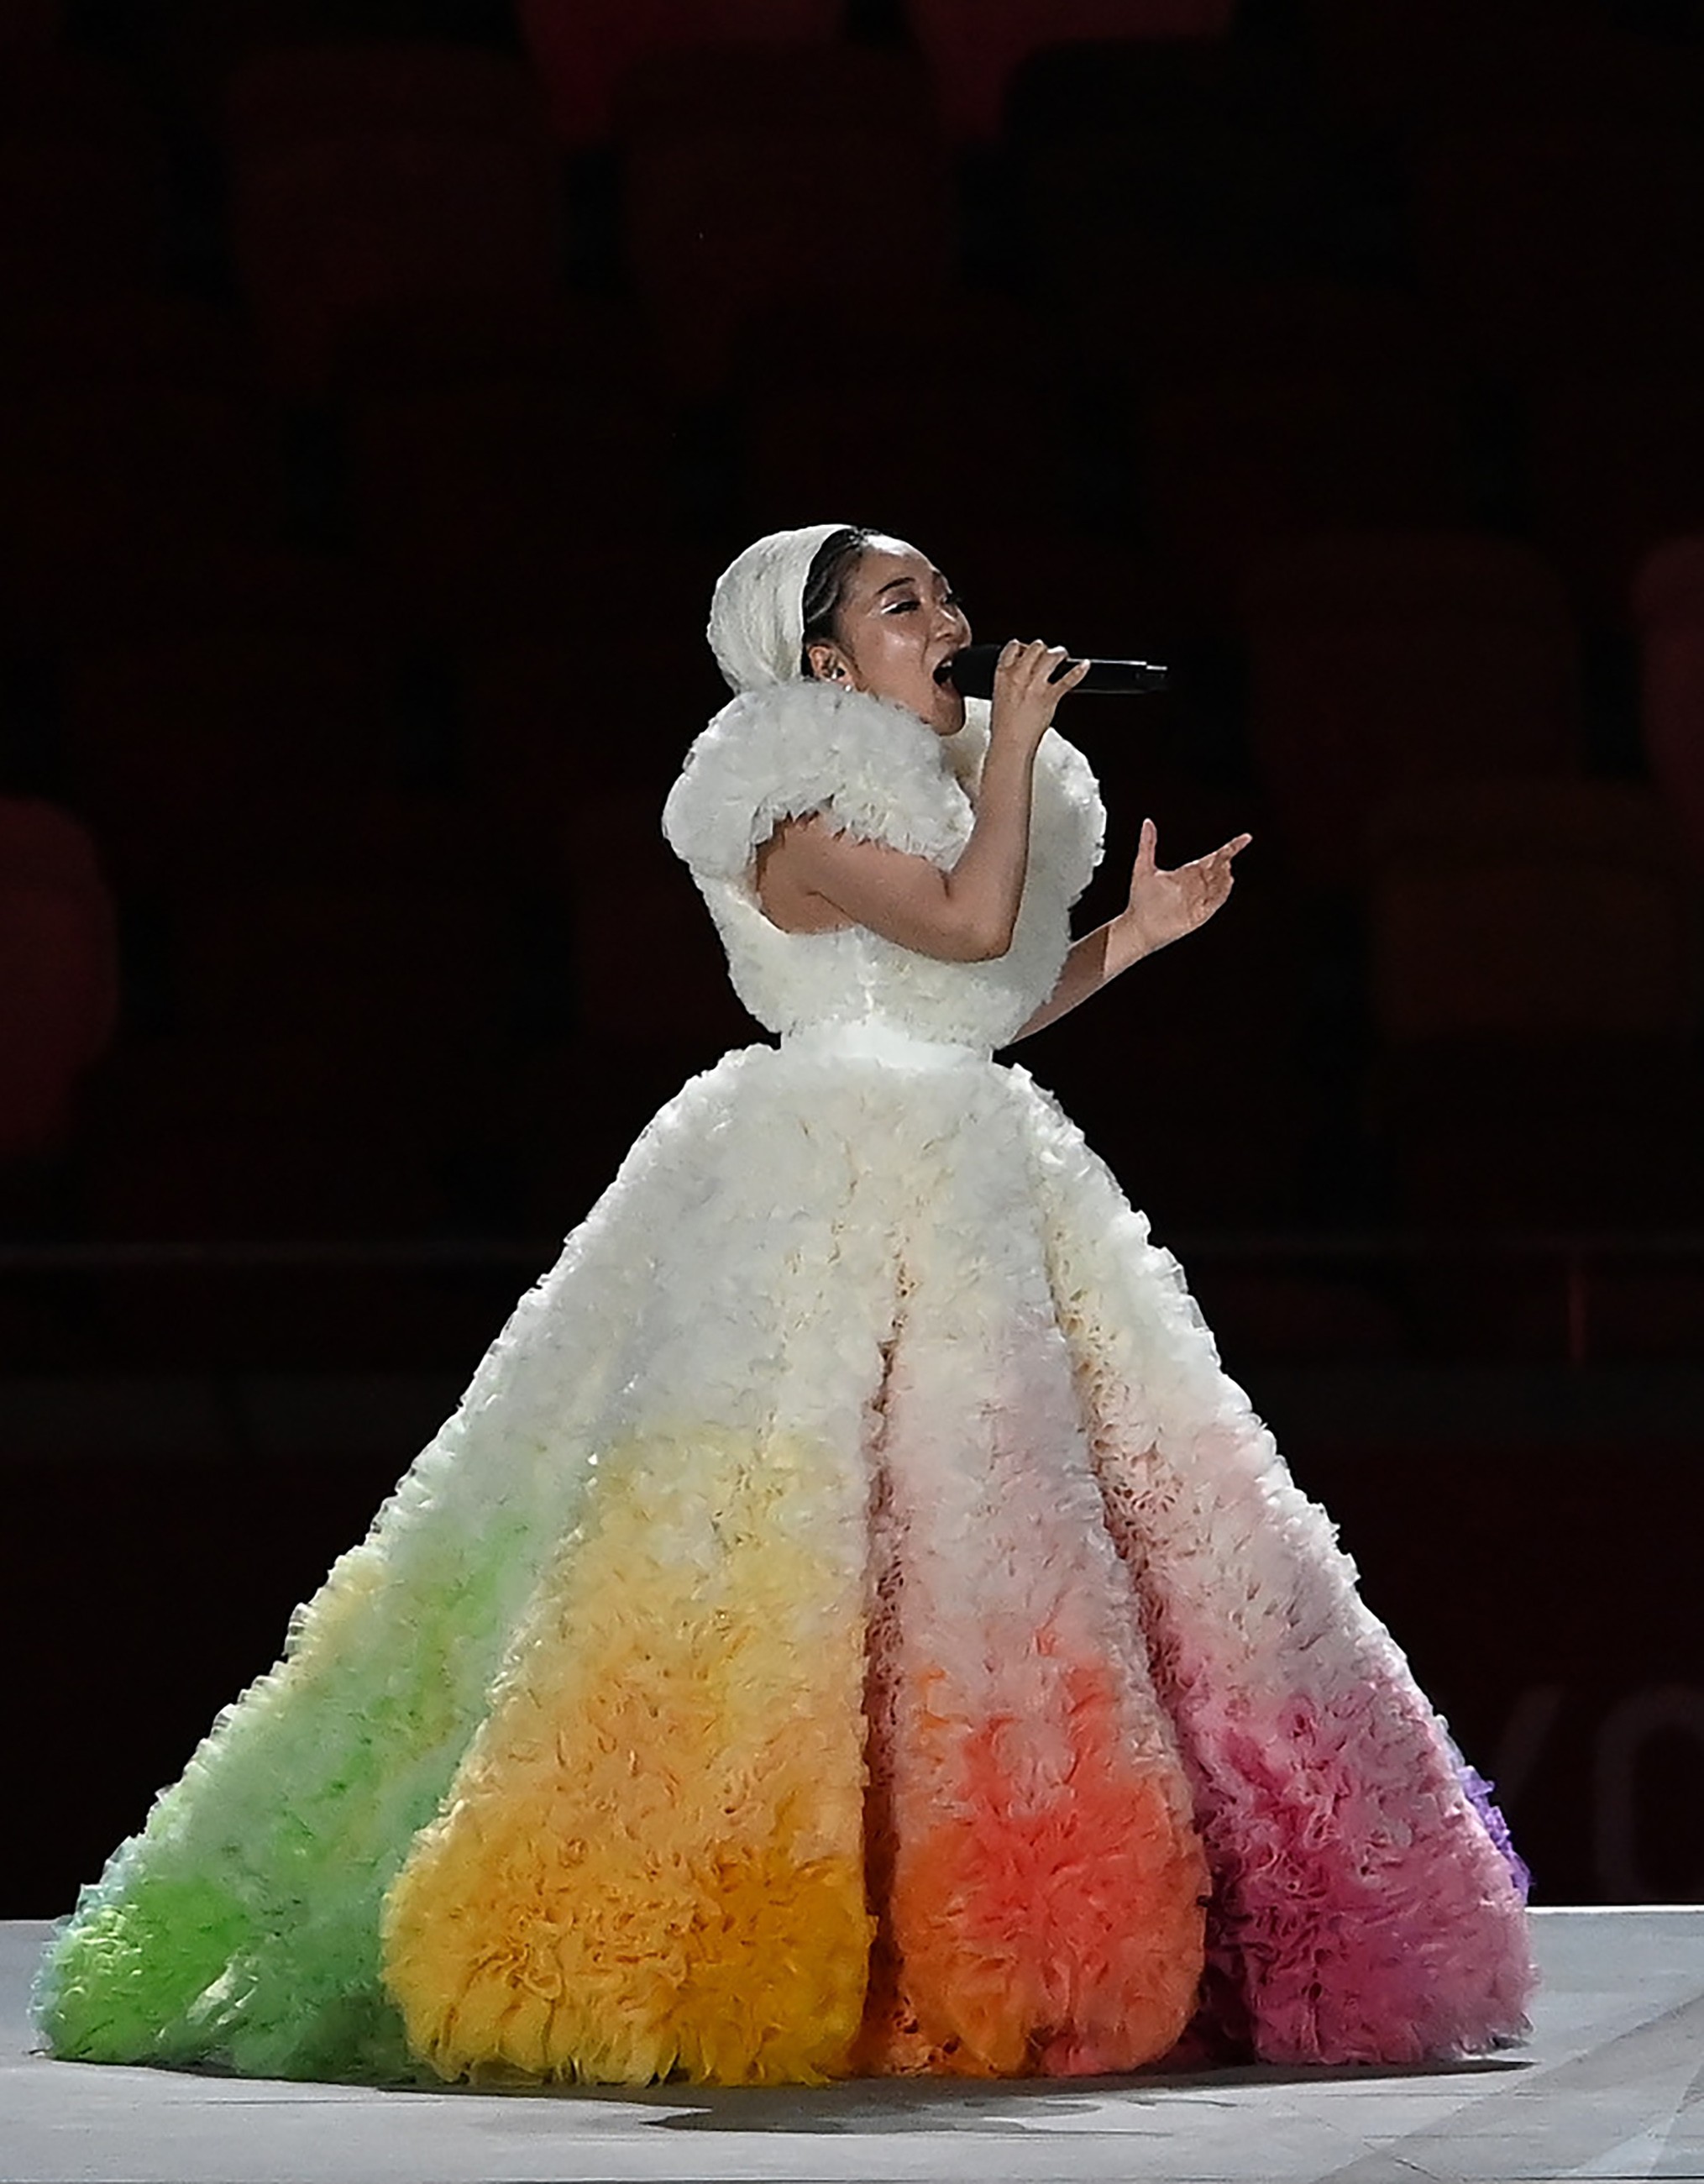 23 July 2021, Japan, Tokio: Olympics: Opening ceremony at the Olympic Stadium. Singer Misa sings the national anthem. Photo: Swen Pförtner/dpa (Photo by Swen Pförtner/picture alliance via Getty Images) (Foto: dpa/picture alliance via Getty I)